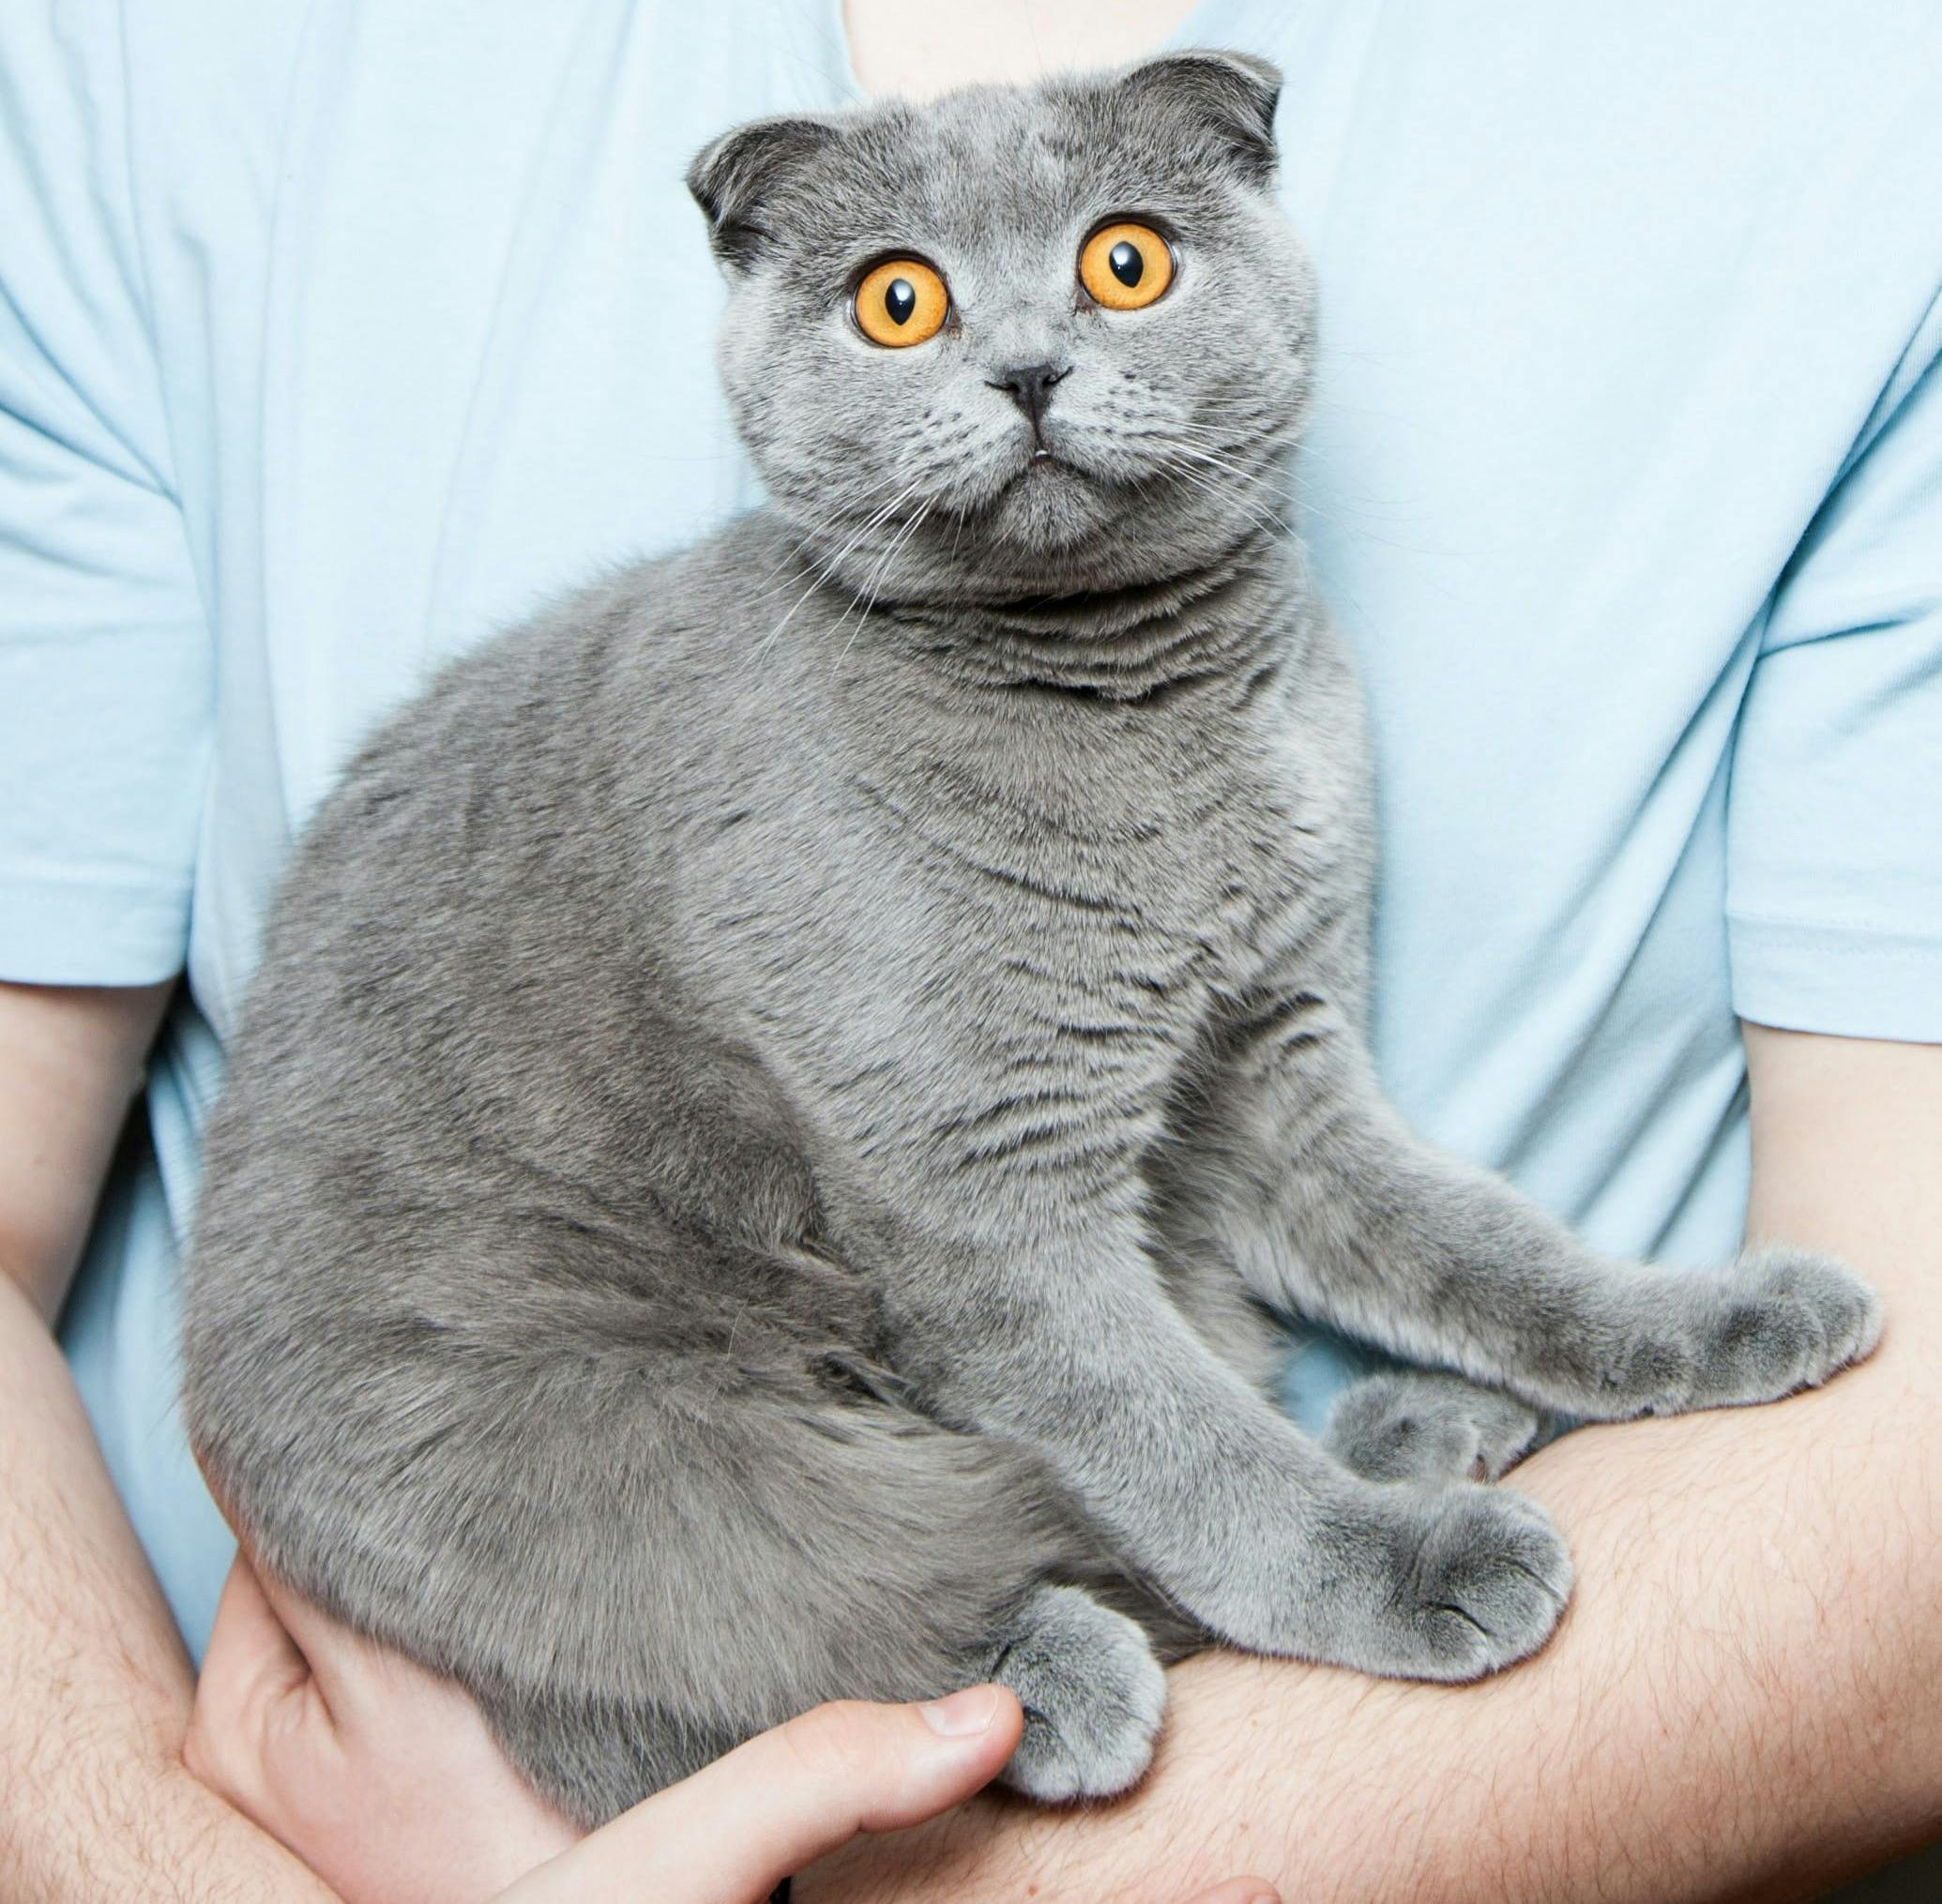 A grey cat with big yellow eyes... the cat is scared with big, wide eyes and dropped ears.